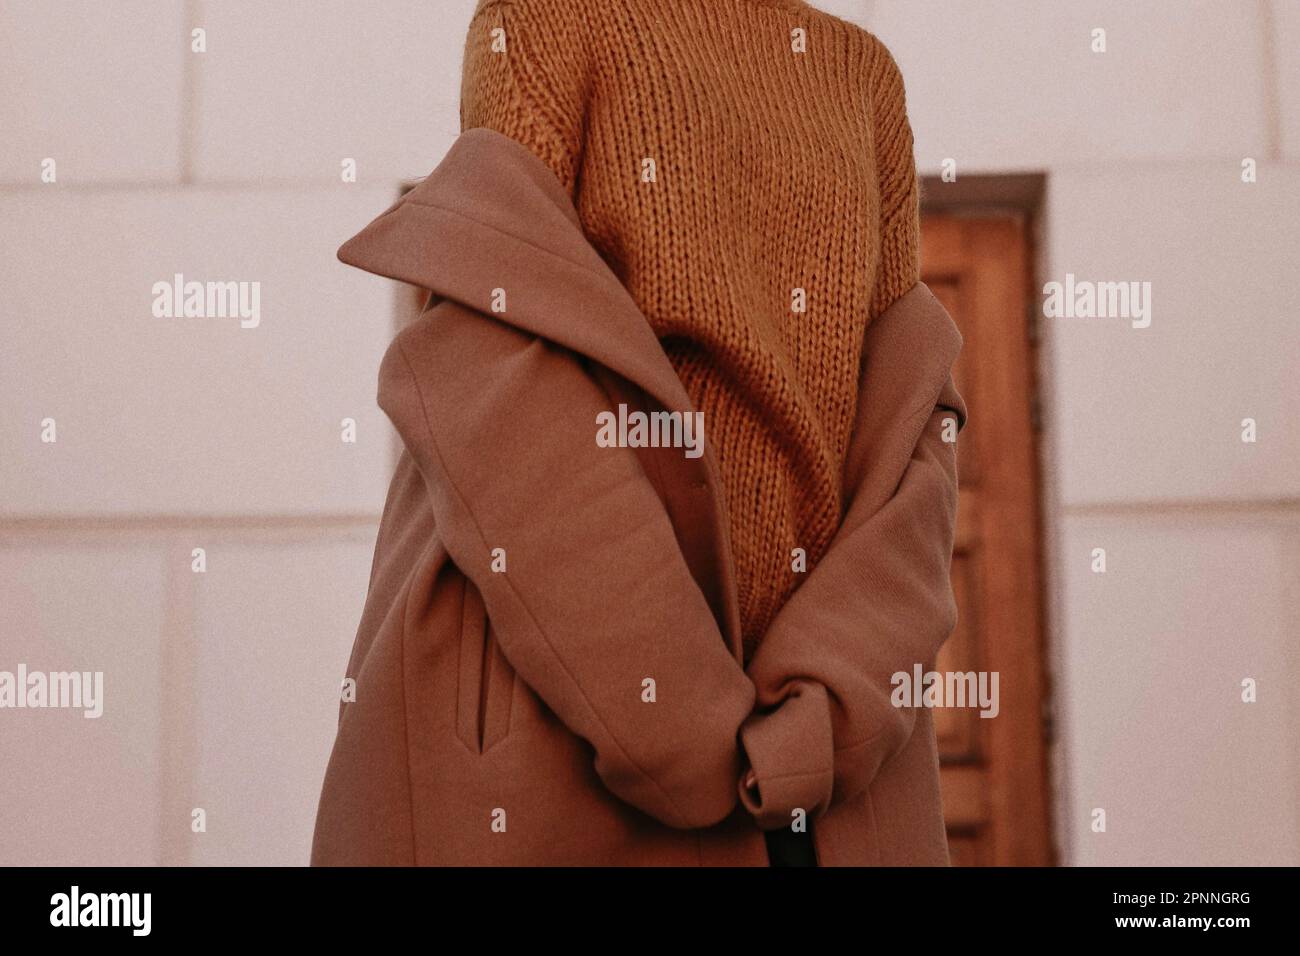 Female body in the orange warm knitting cozy sweater and long brown coat. Outdoor portrait in daylight. Autumn winter clothes street style concept Stock Photo